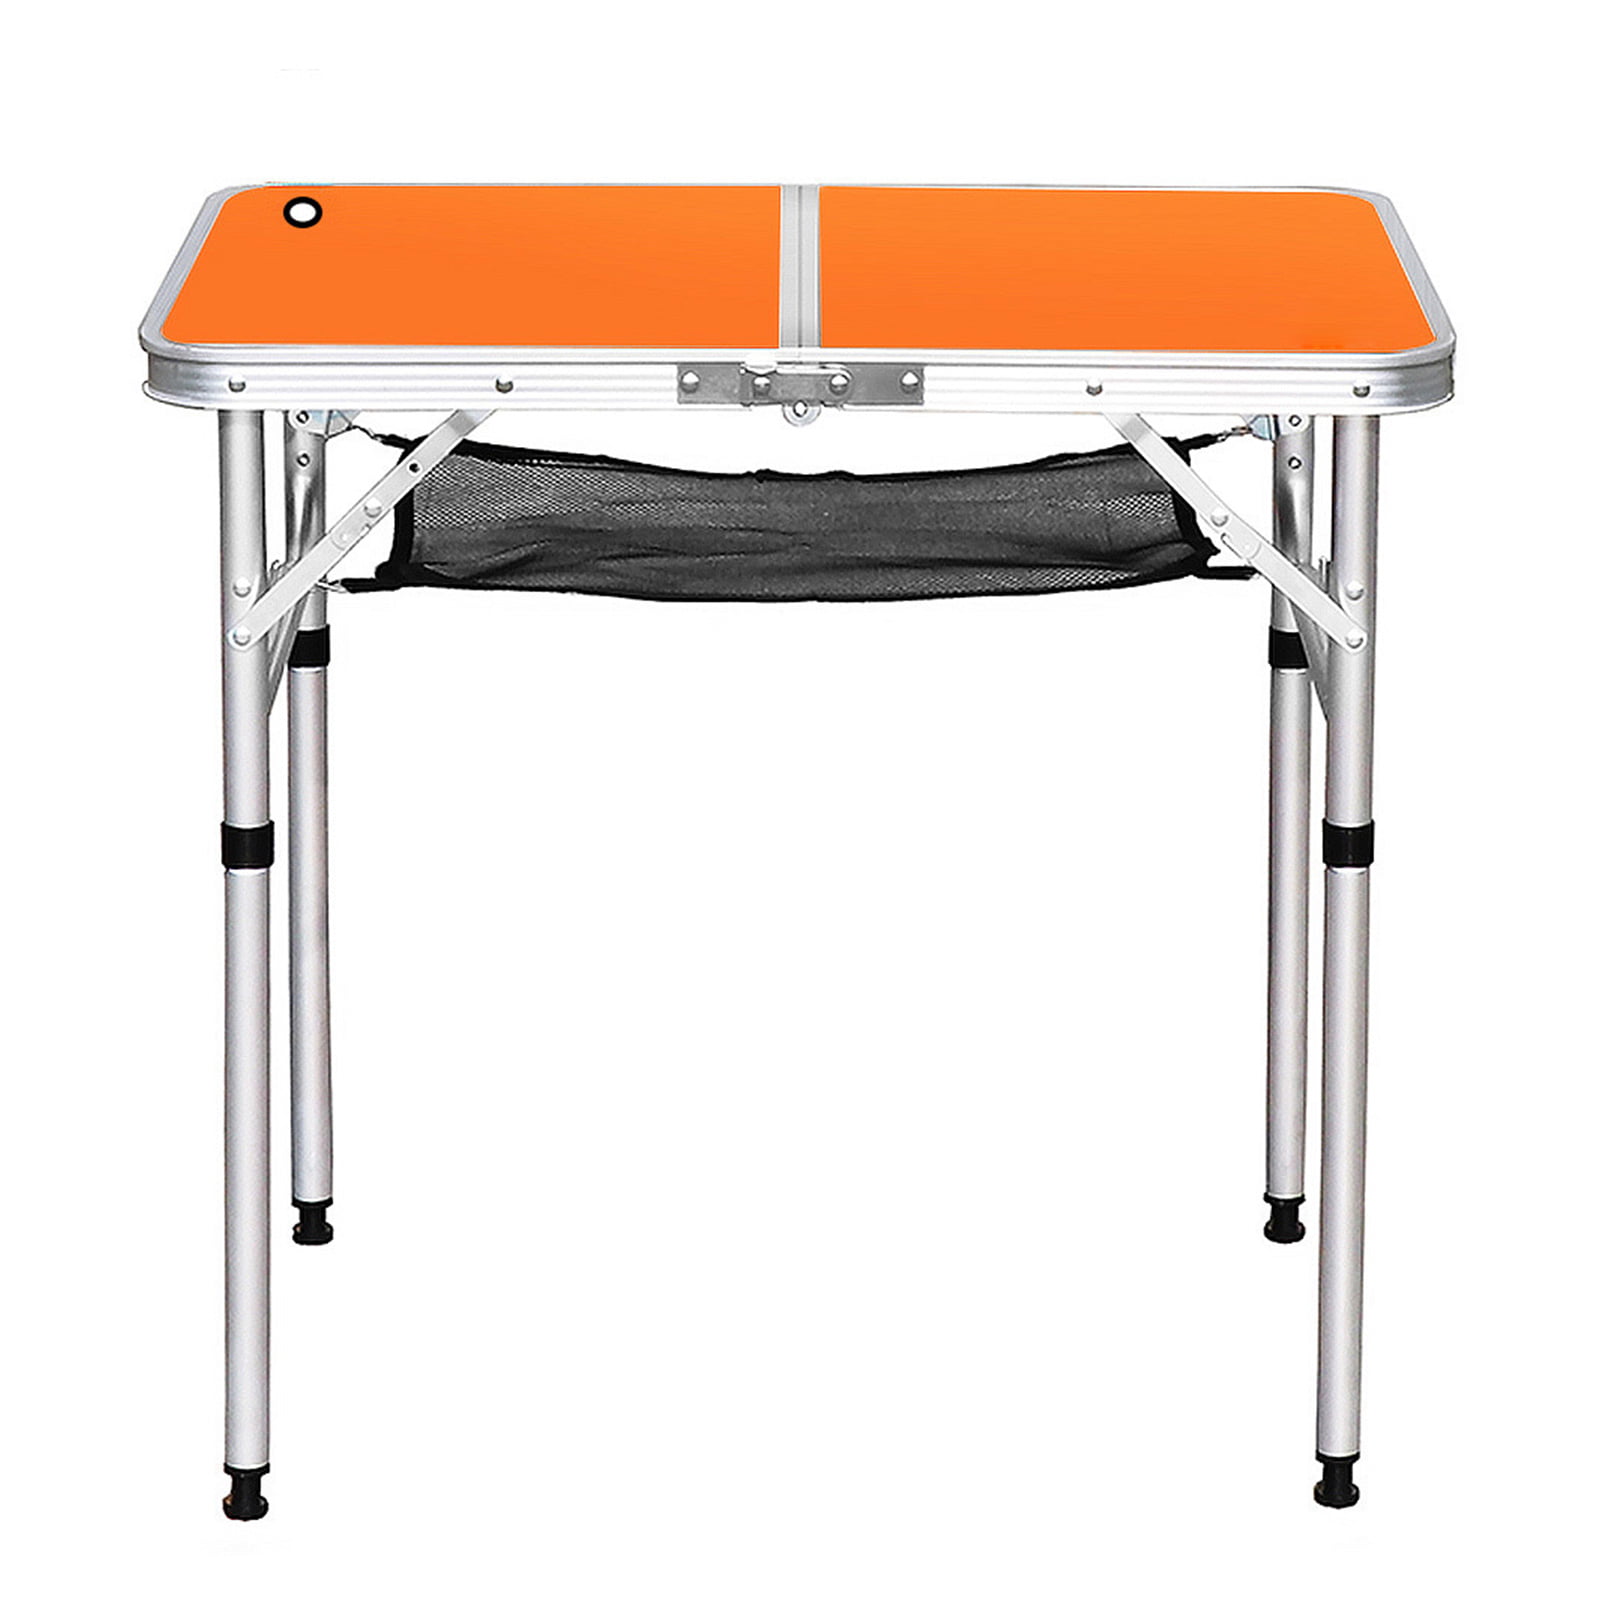 Details about   4FT Camping Folding Table Aluminium Portable Table Outdoor Picnic Party BBQ Desk 